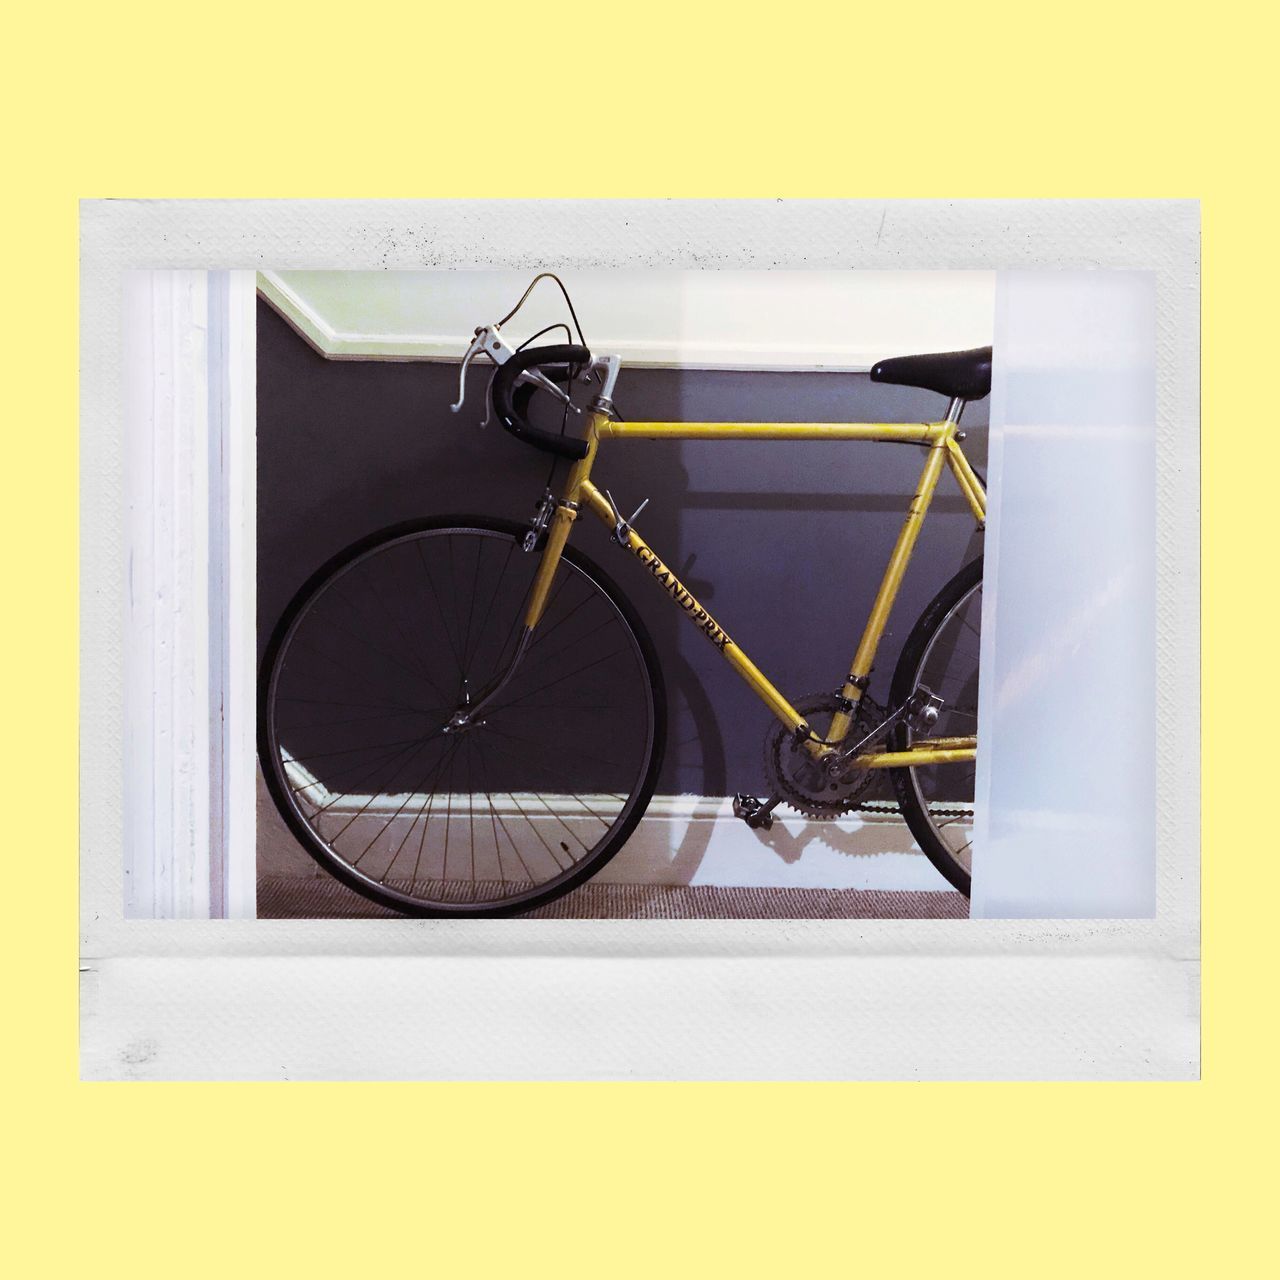 CLOSE-UP OF BICYCLE AGAINST WALL